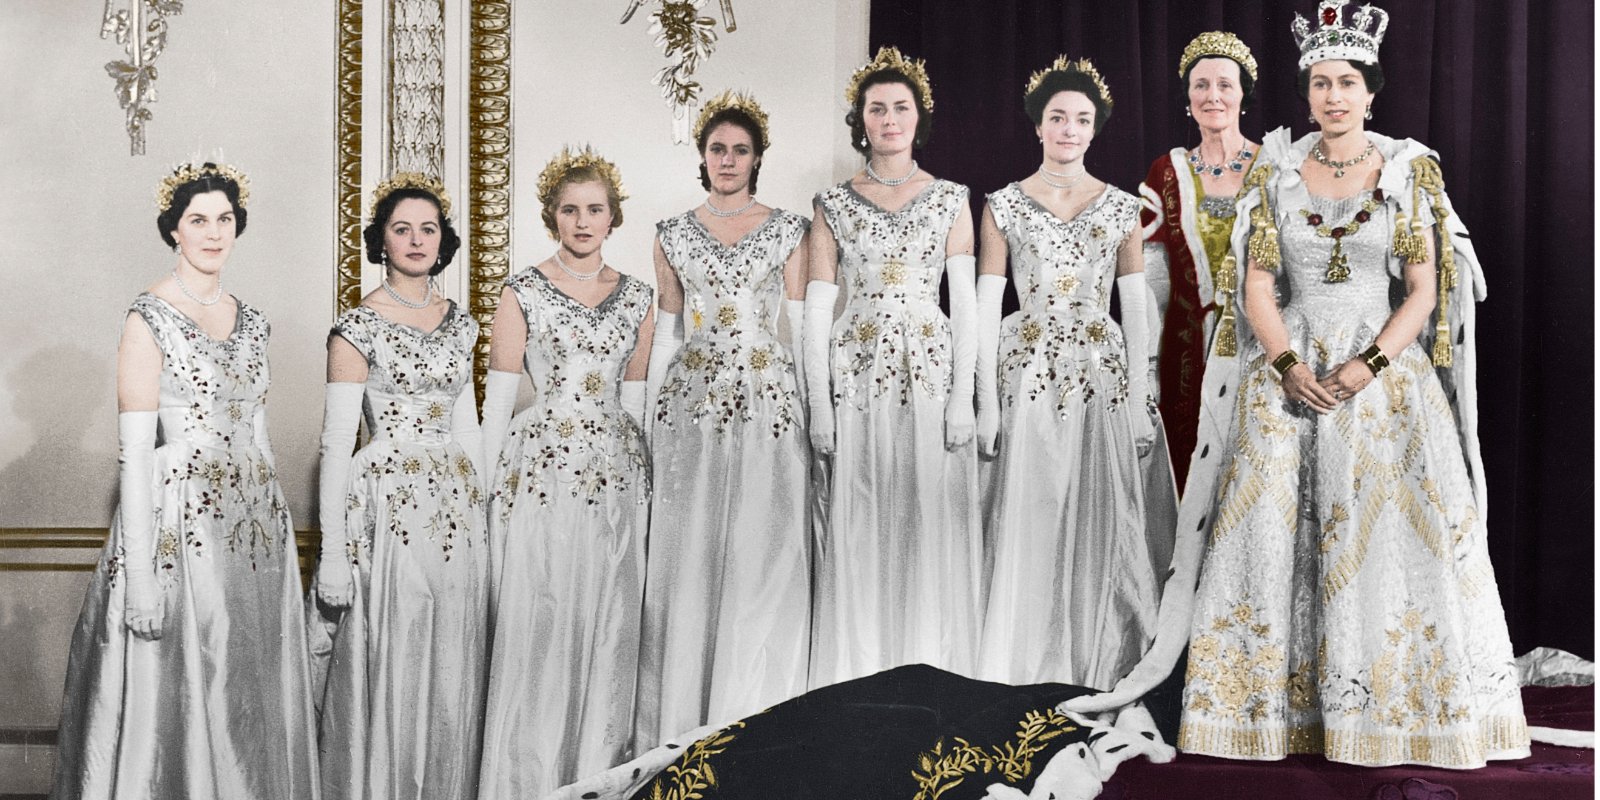 Queen Elizabeth and her maids of honor at her coronation ceremony in 1954.